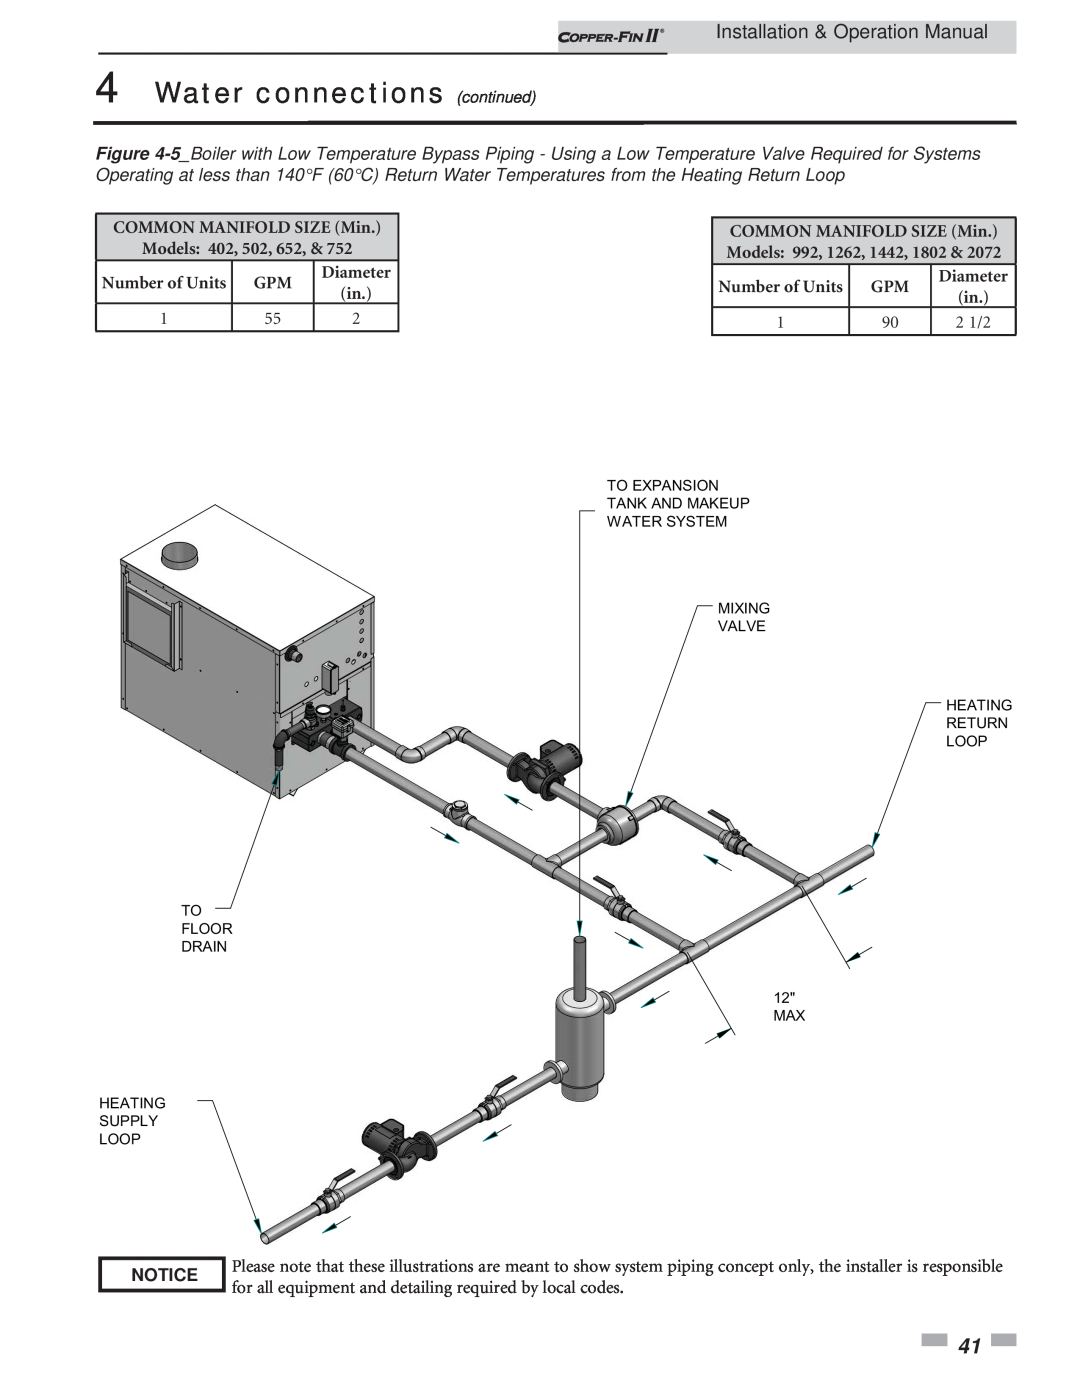 Lochinvar 402 - 2072 operation manual Water connections continued, Installation & Operation Manual, Notice 